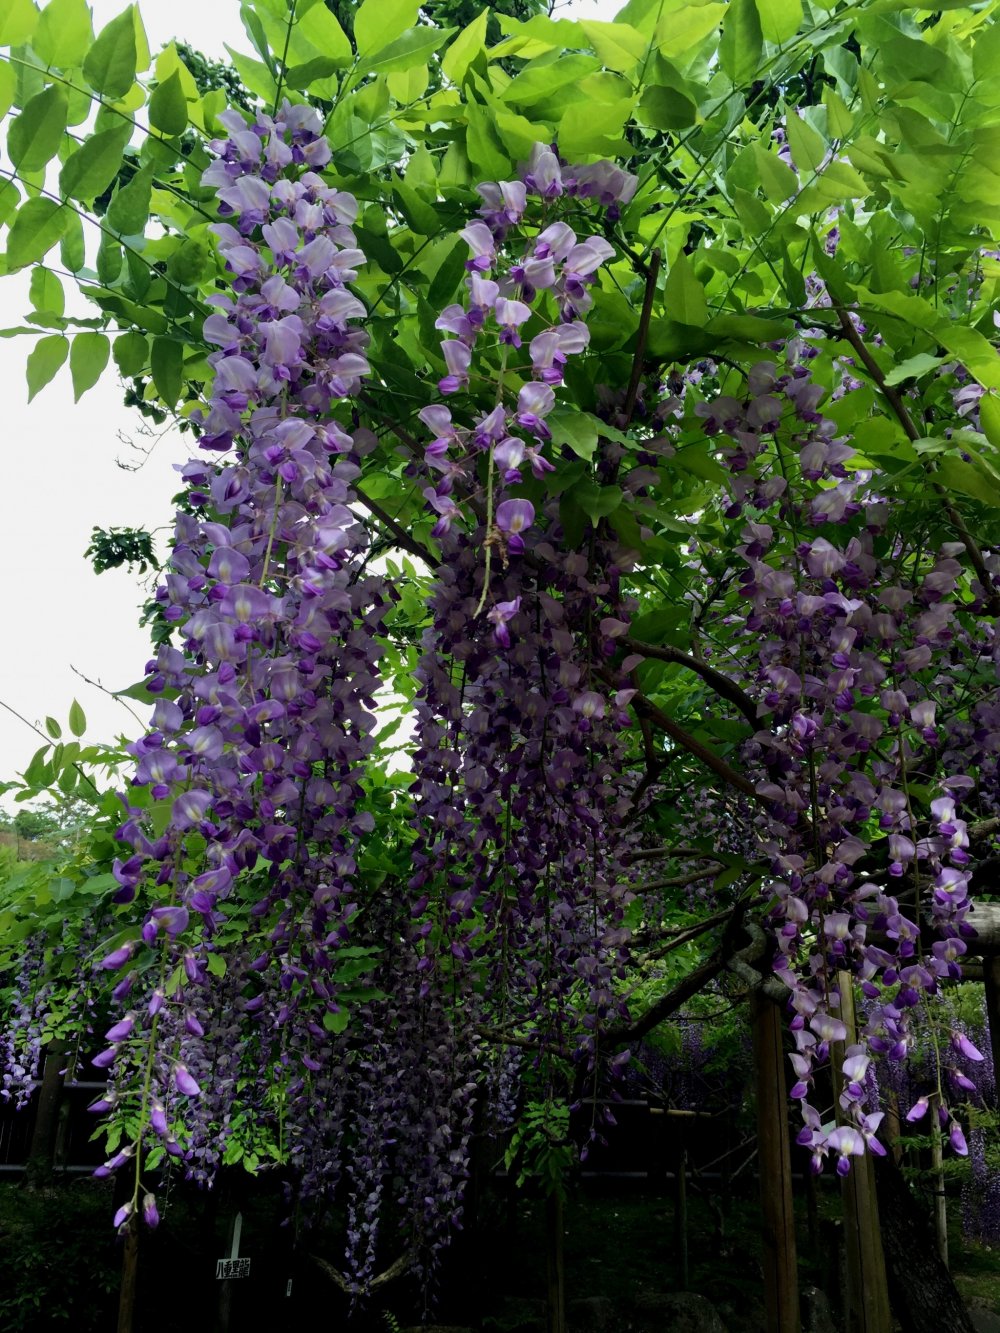 &nbsp;One of more than 20 species of wisteria blooms in the garden